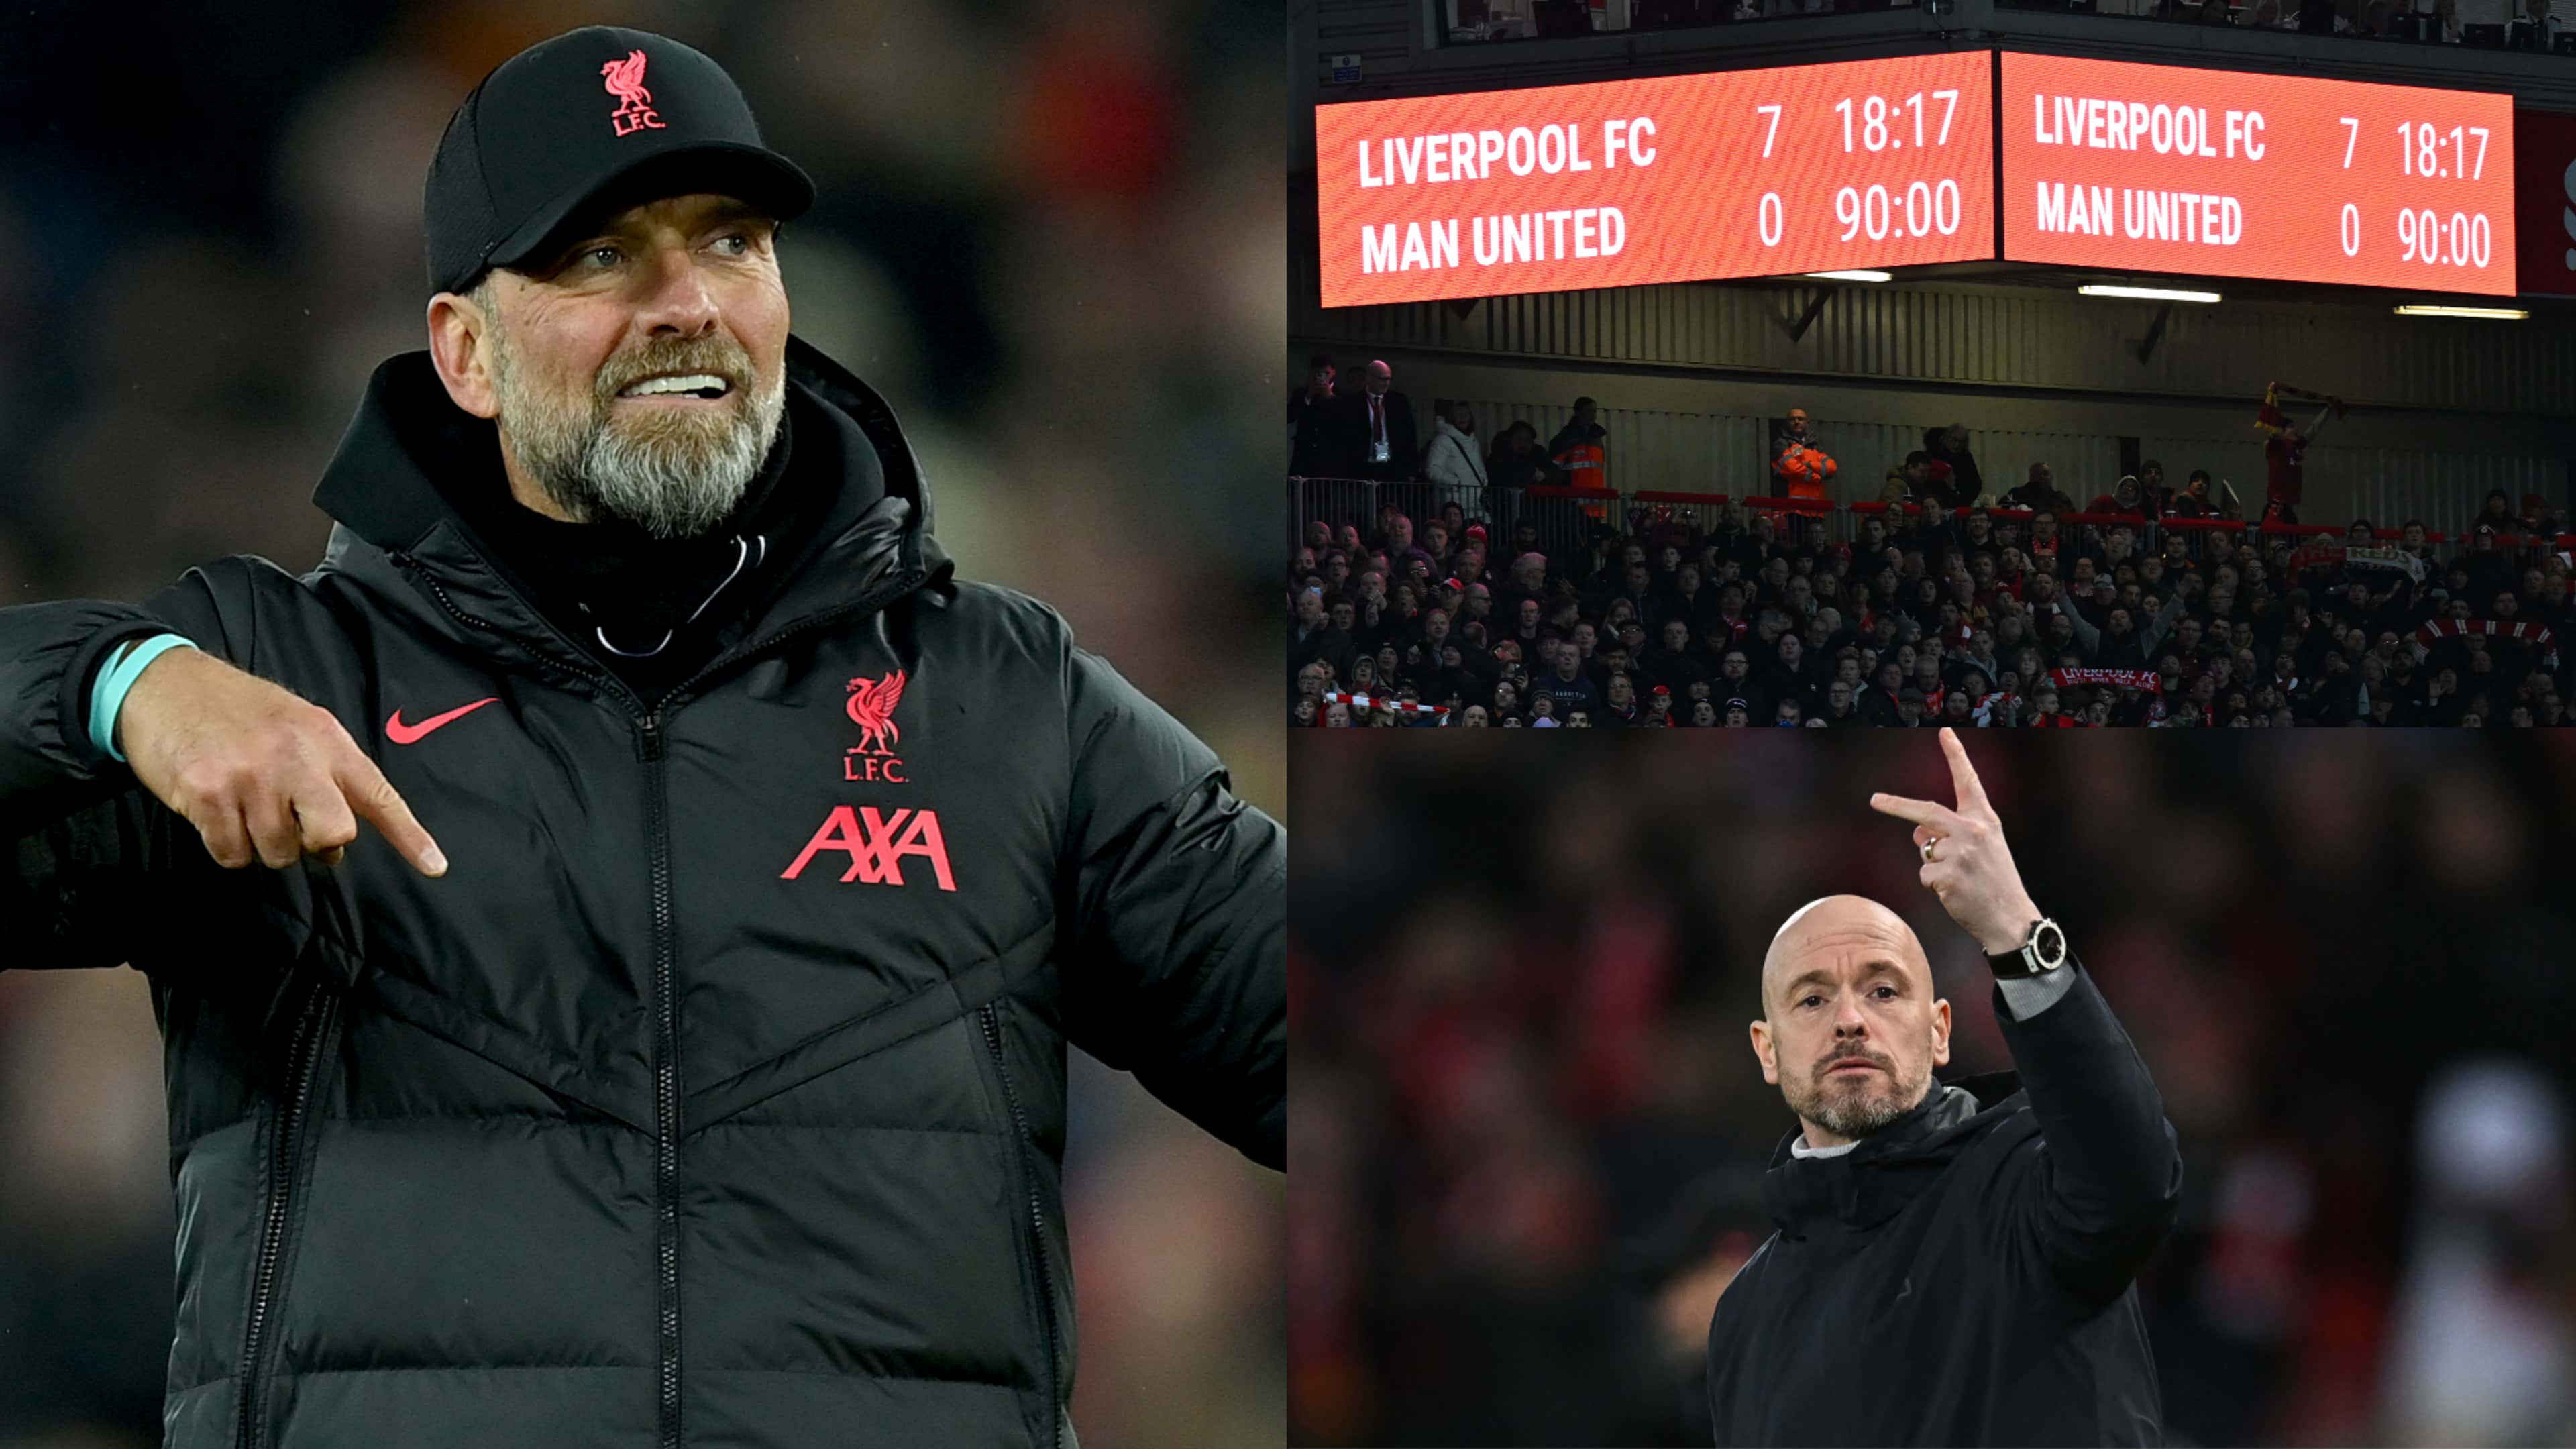 Union SG vs Liverpool result: Jurgen Klopp's youngsters come up short